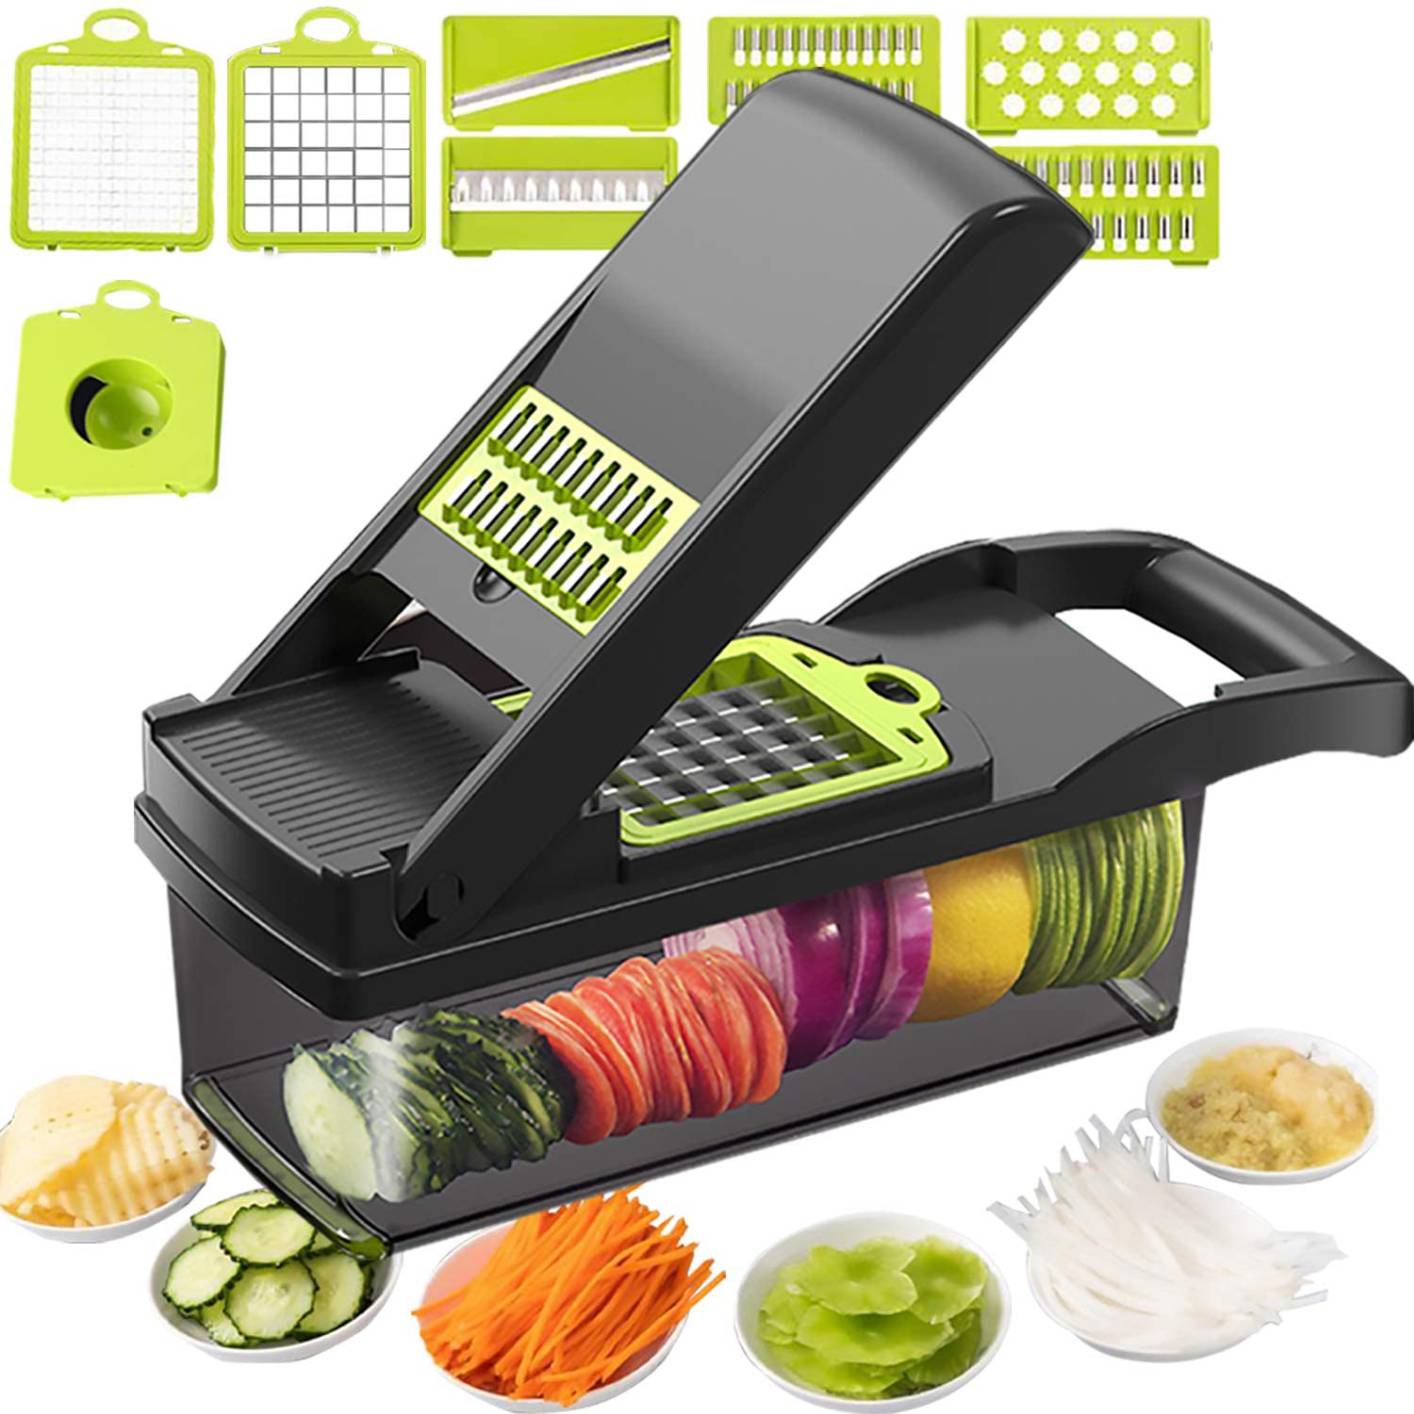 Vegetable Chopper Mandoline Slicer Cutter Chopper 12 in 1 Interchangeable Blades with Colander Basket and Container by LAGPOUSI Cleaningtool 